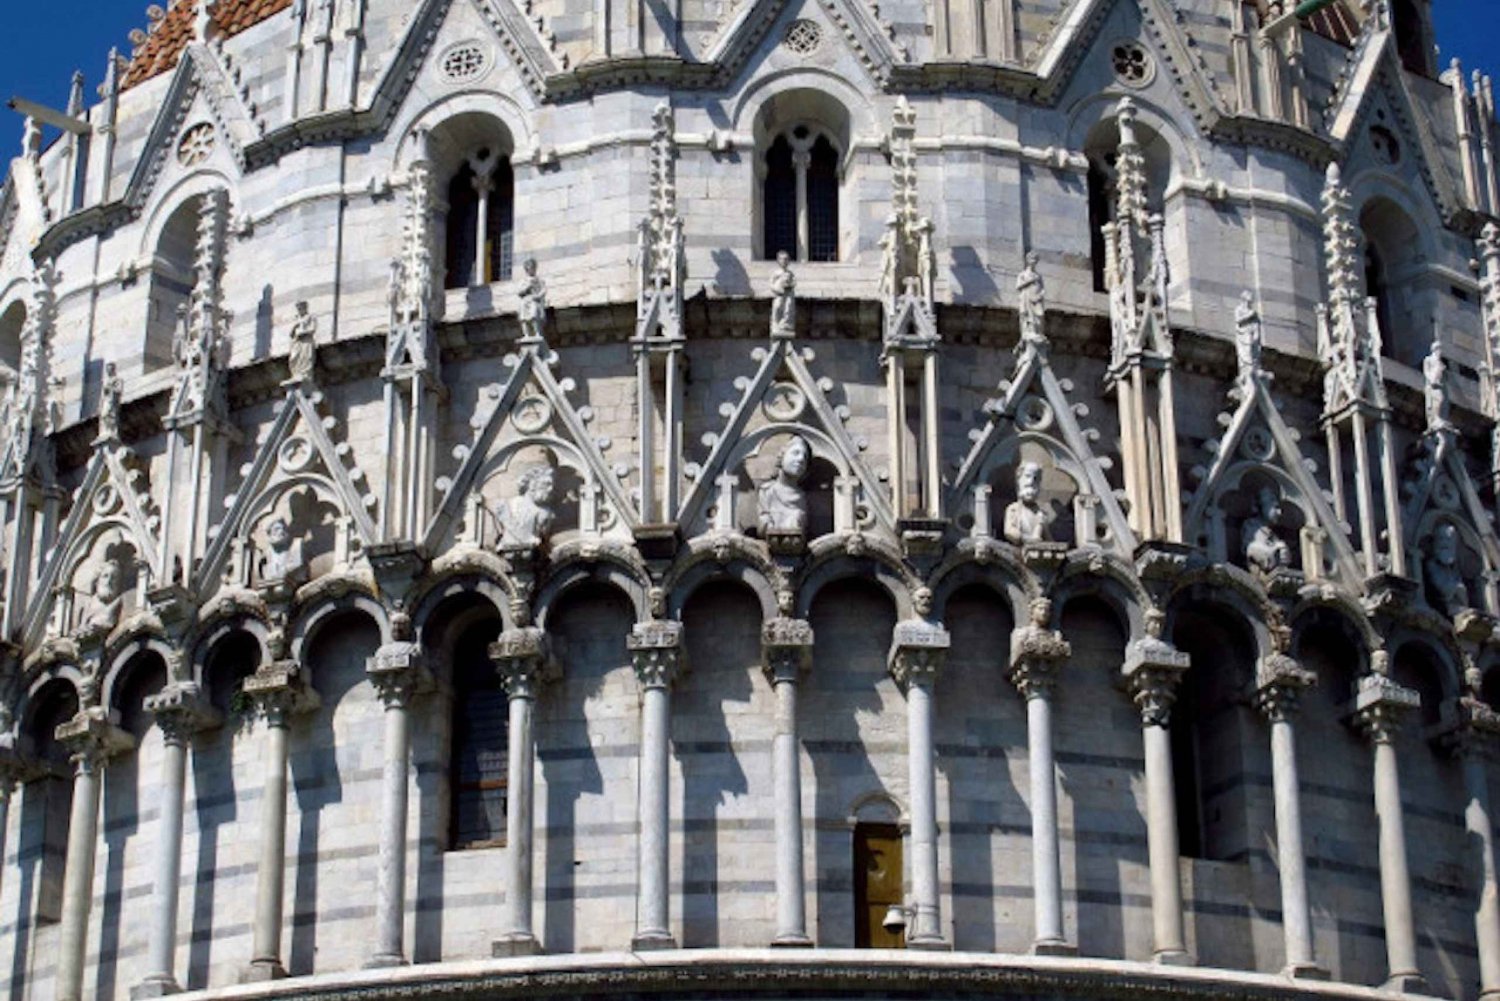 Pisa: Square of Miracles Entry Tickets and Audio Guide